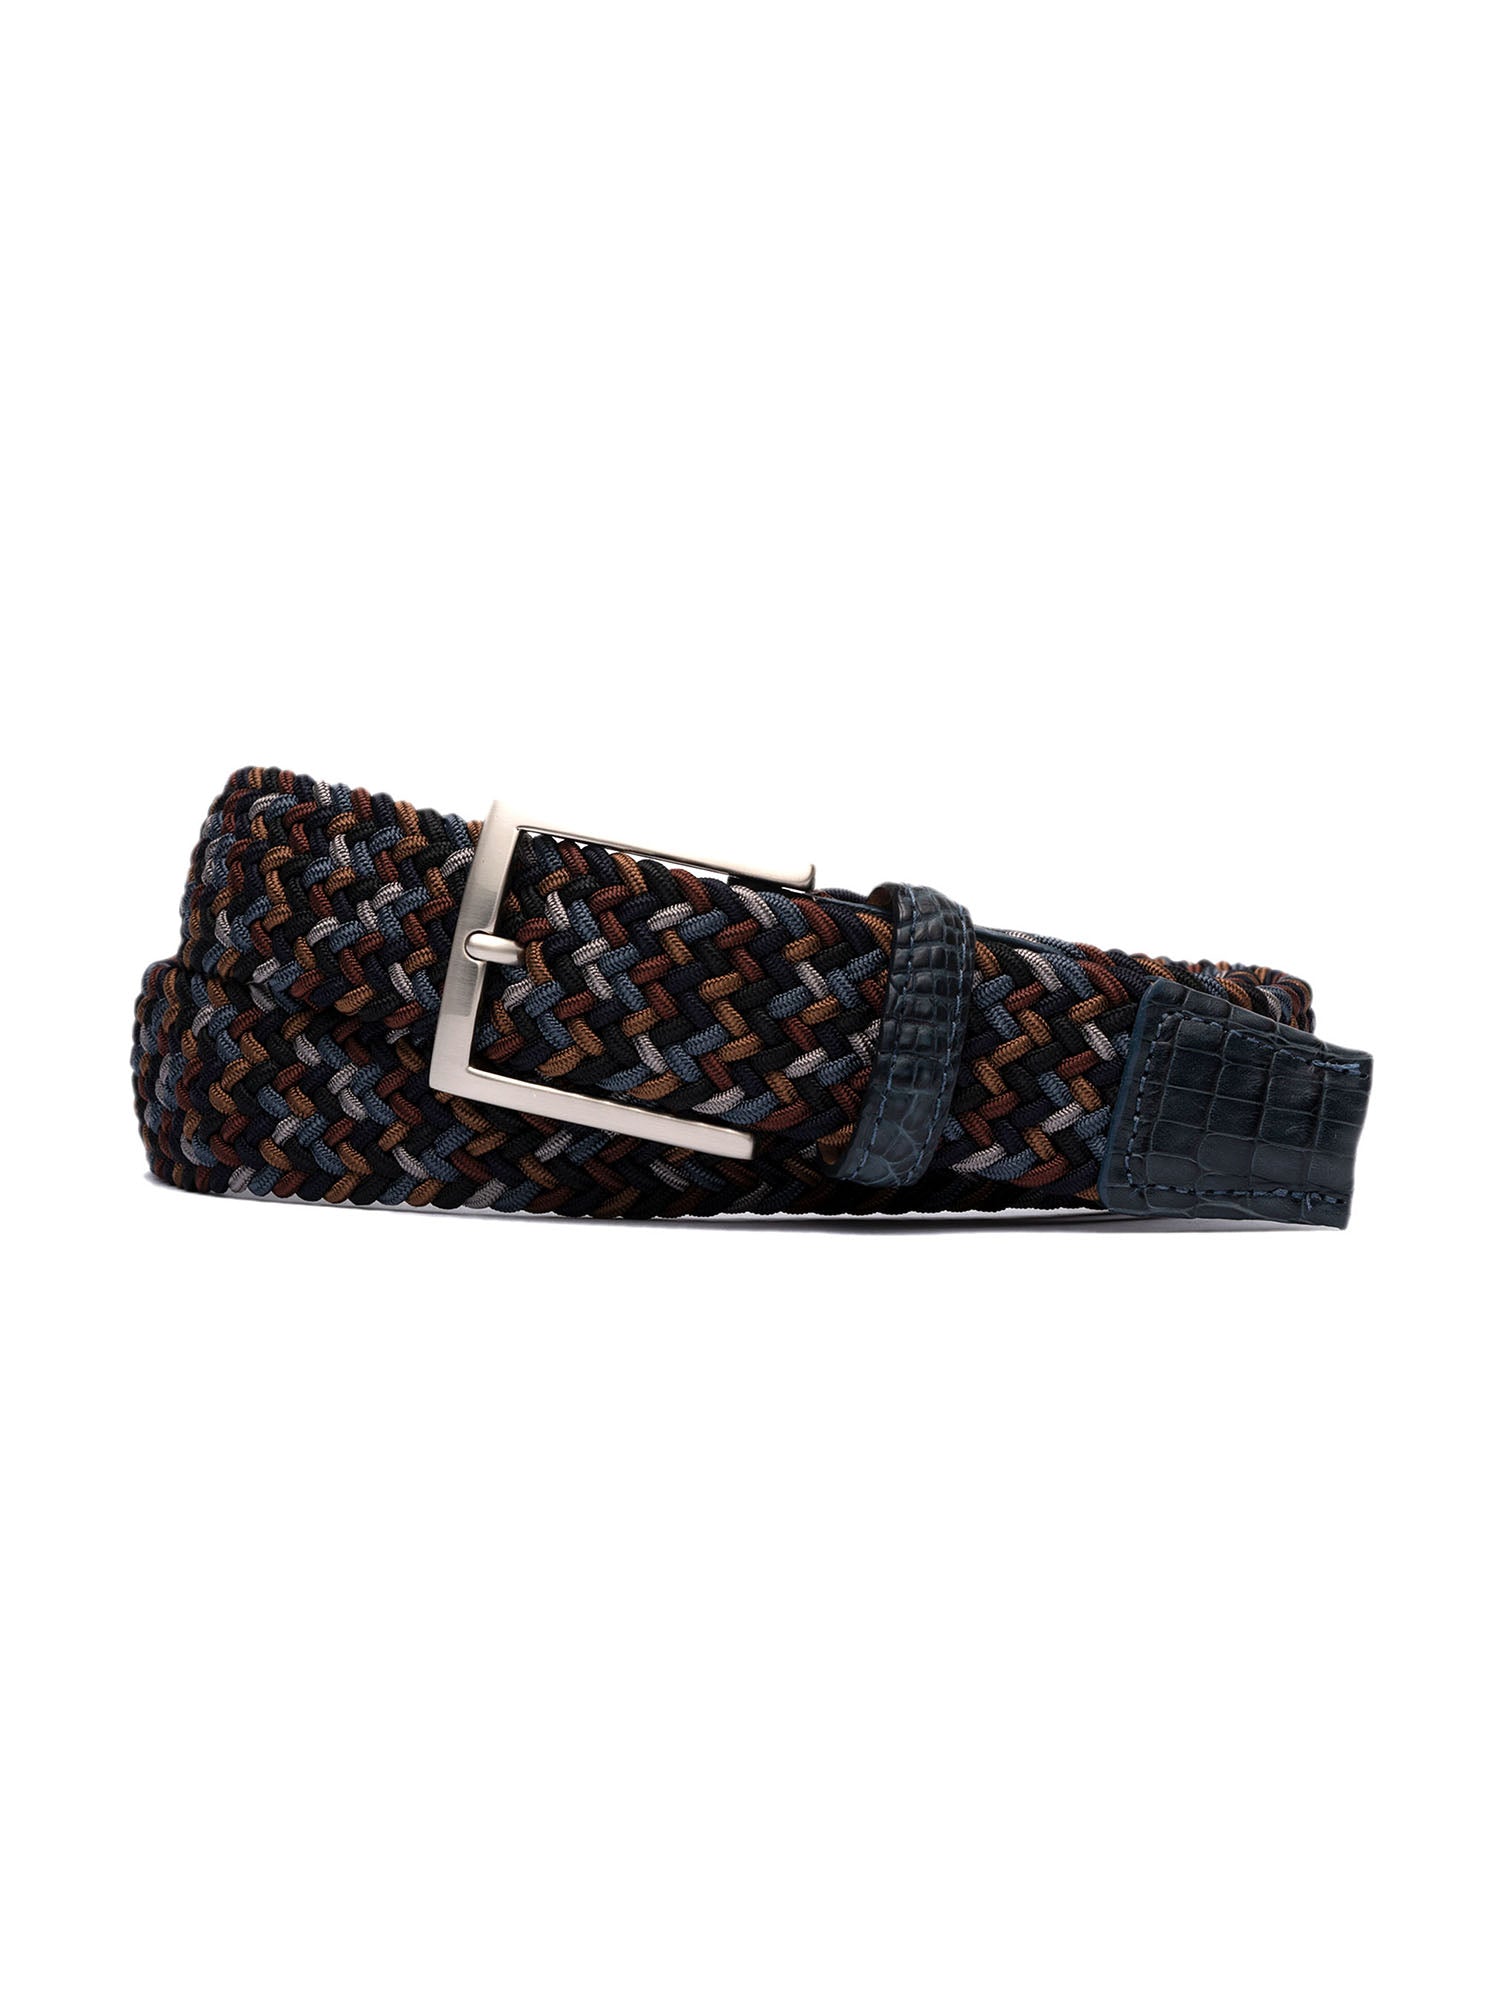 Louis Vuitton Belt for Mens - household items - by owner